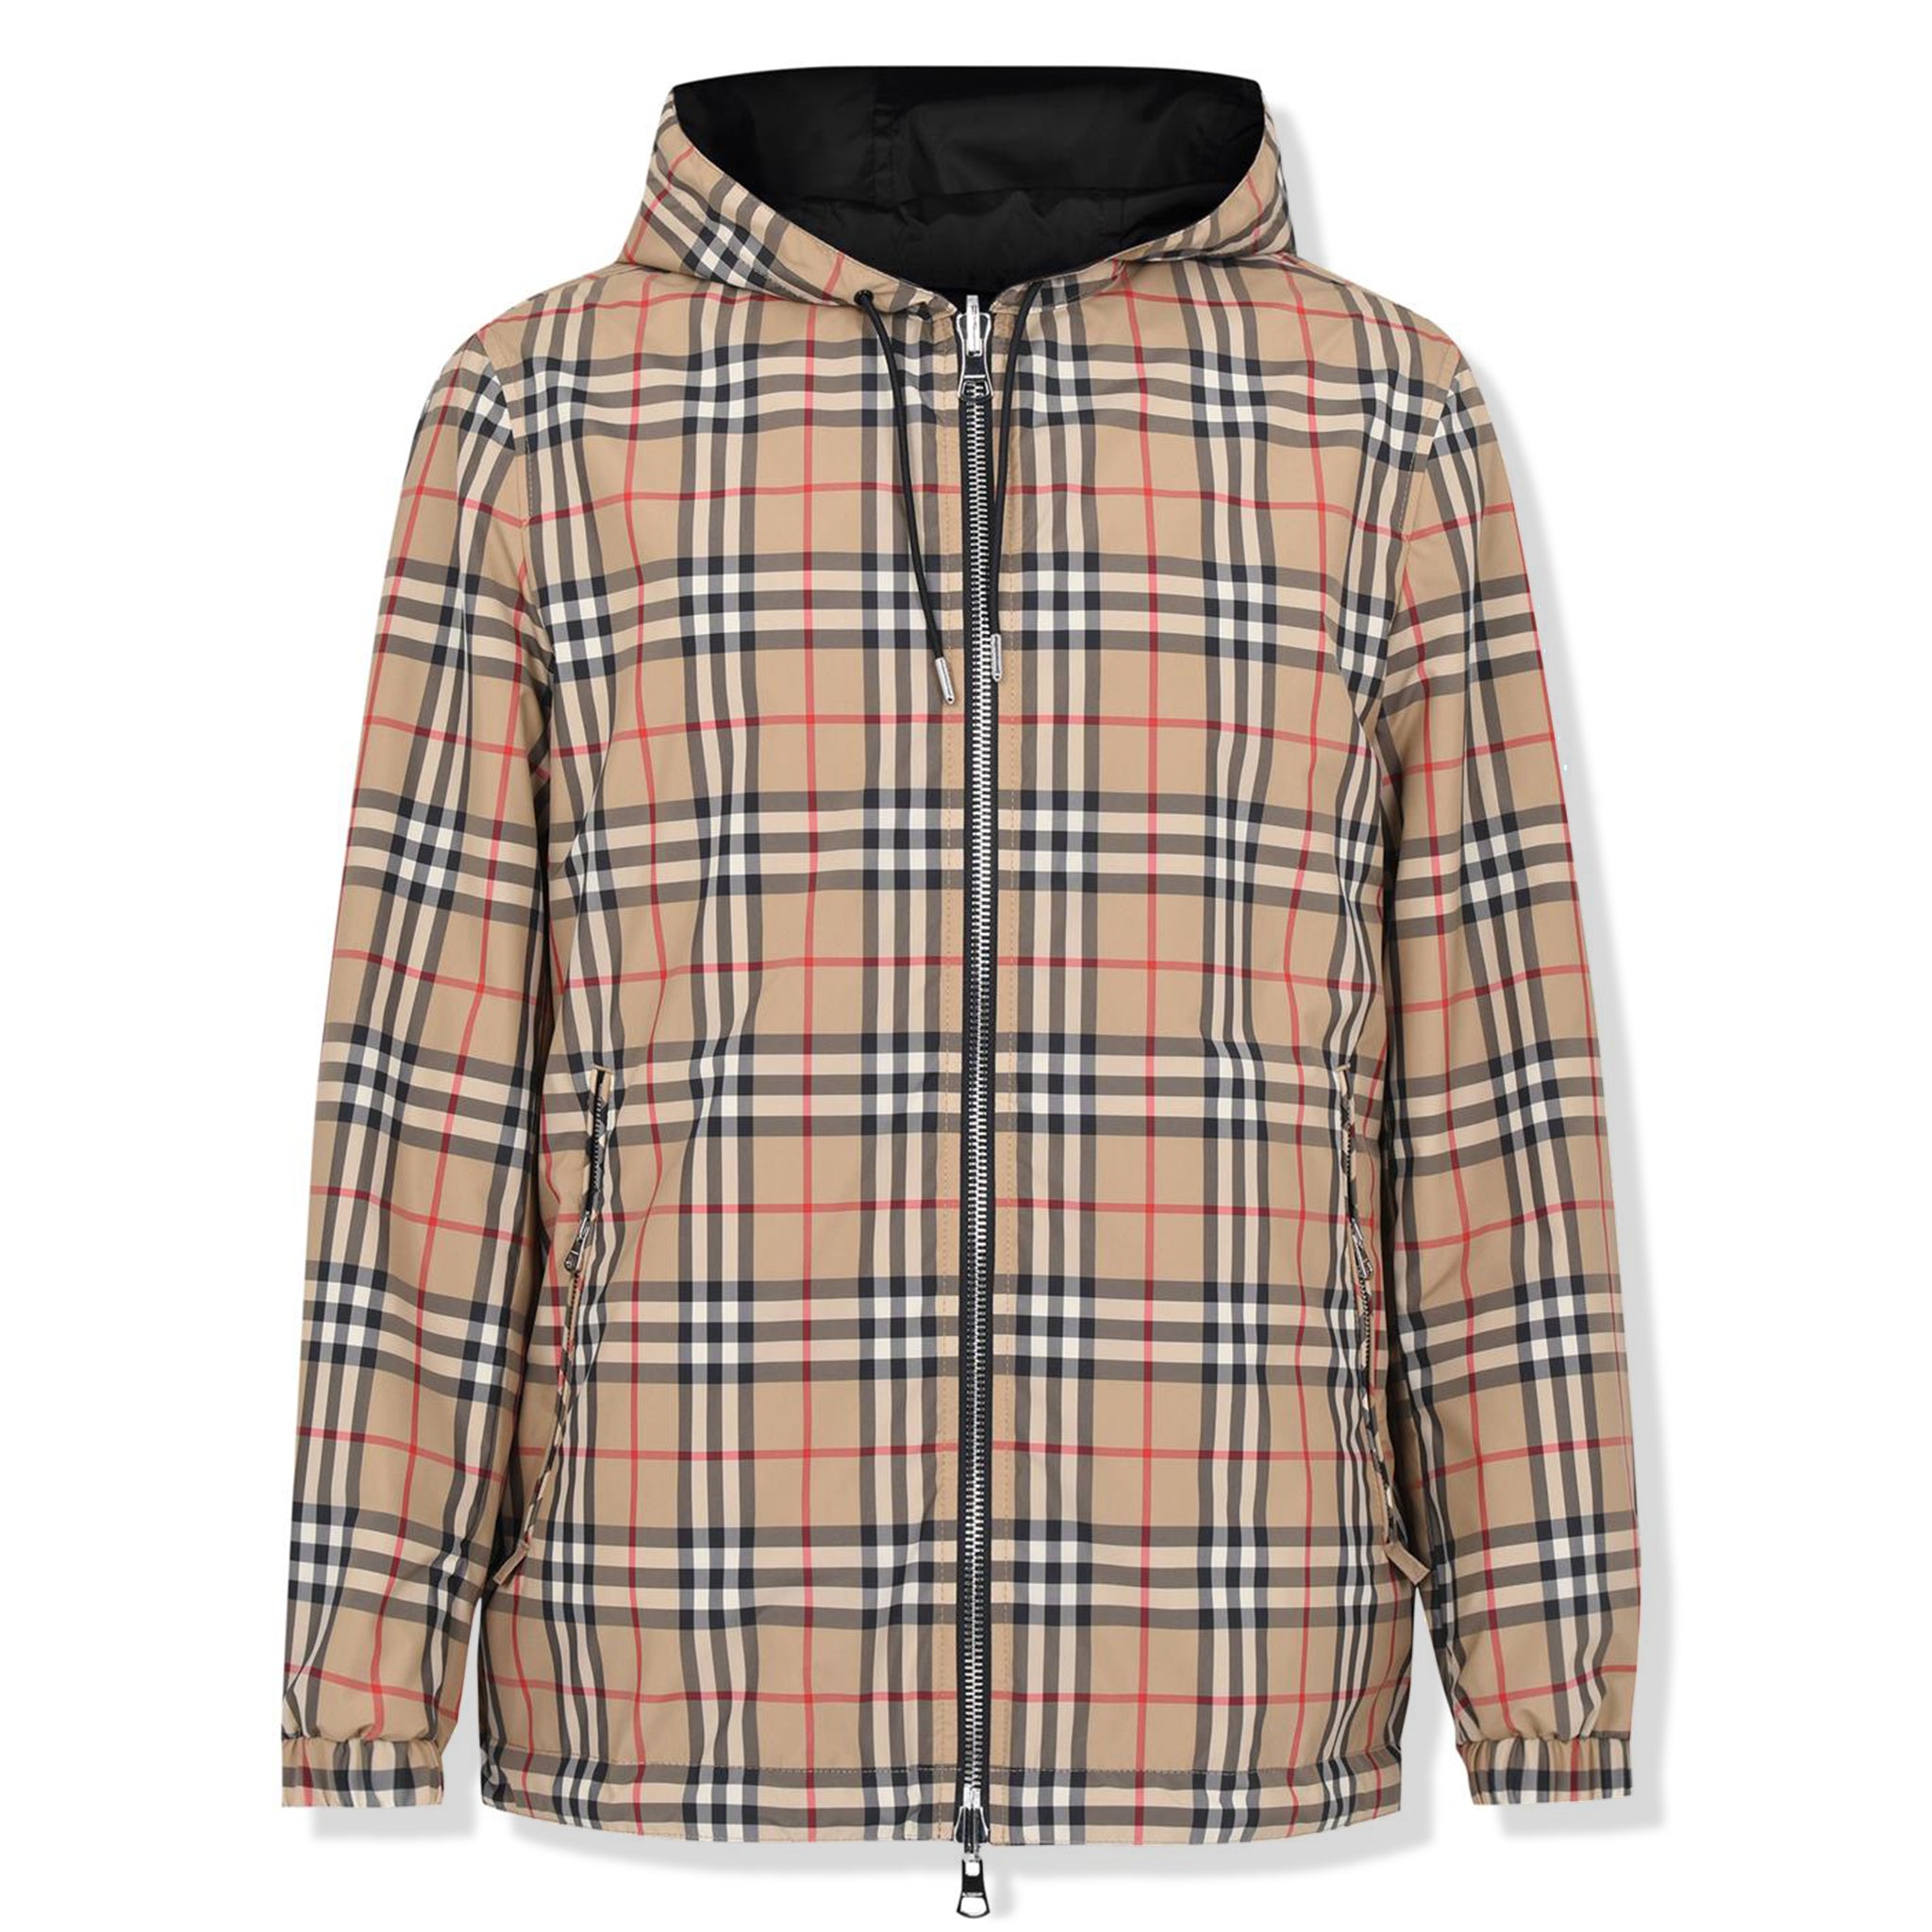 Image of Burberry Stretton Reversible Beige Jacket